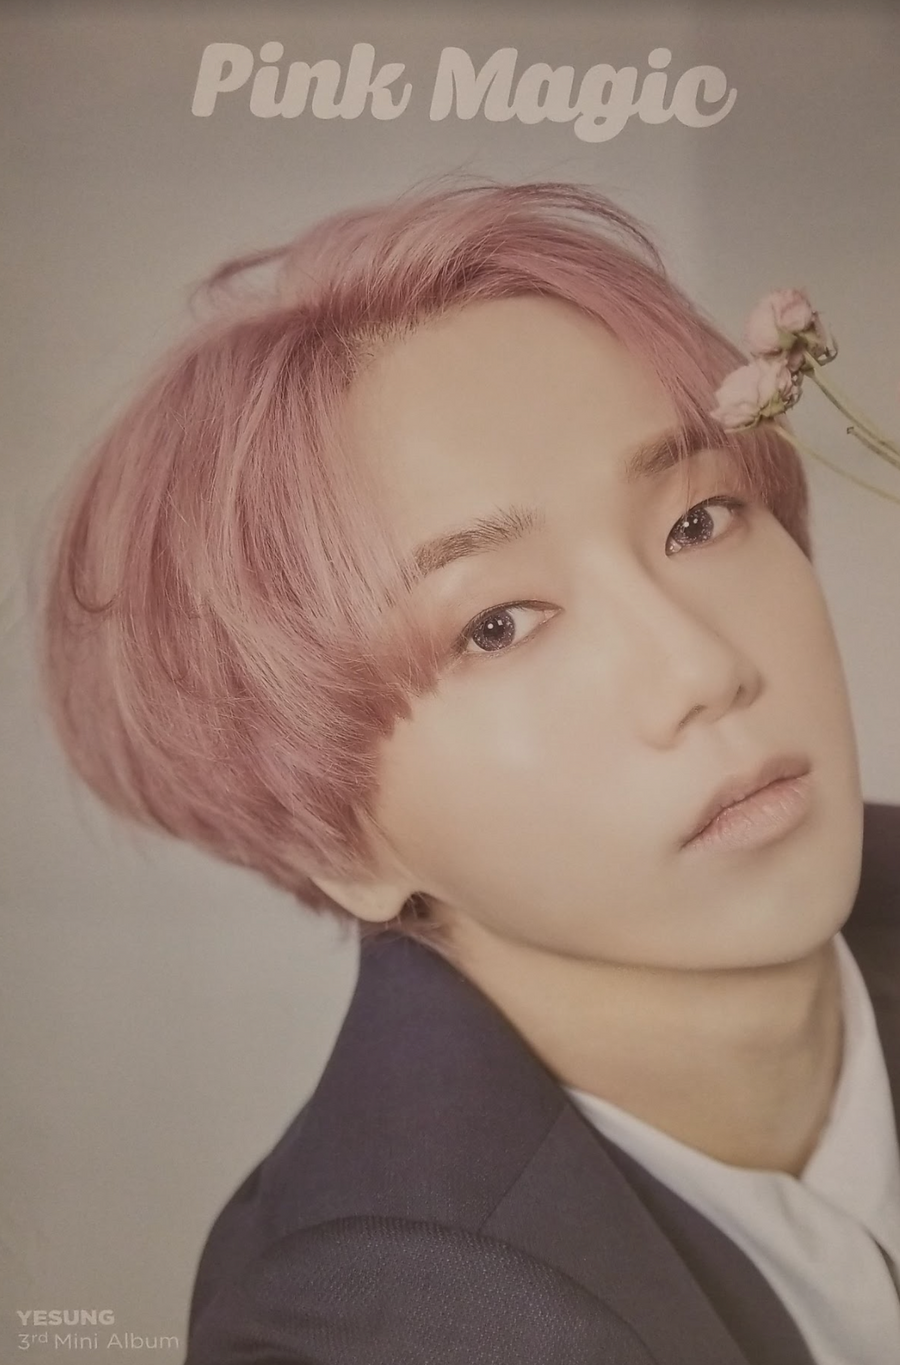 Yesung 3rd Mini Album Pink Magic Official Poster - Photo Concept 3